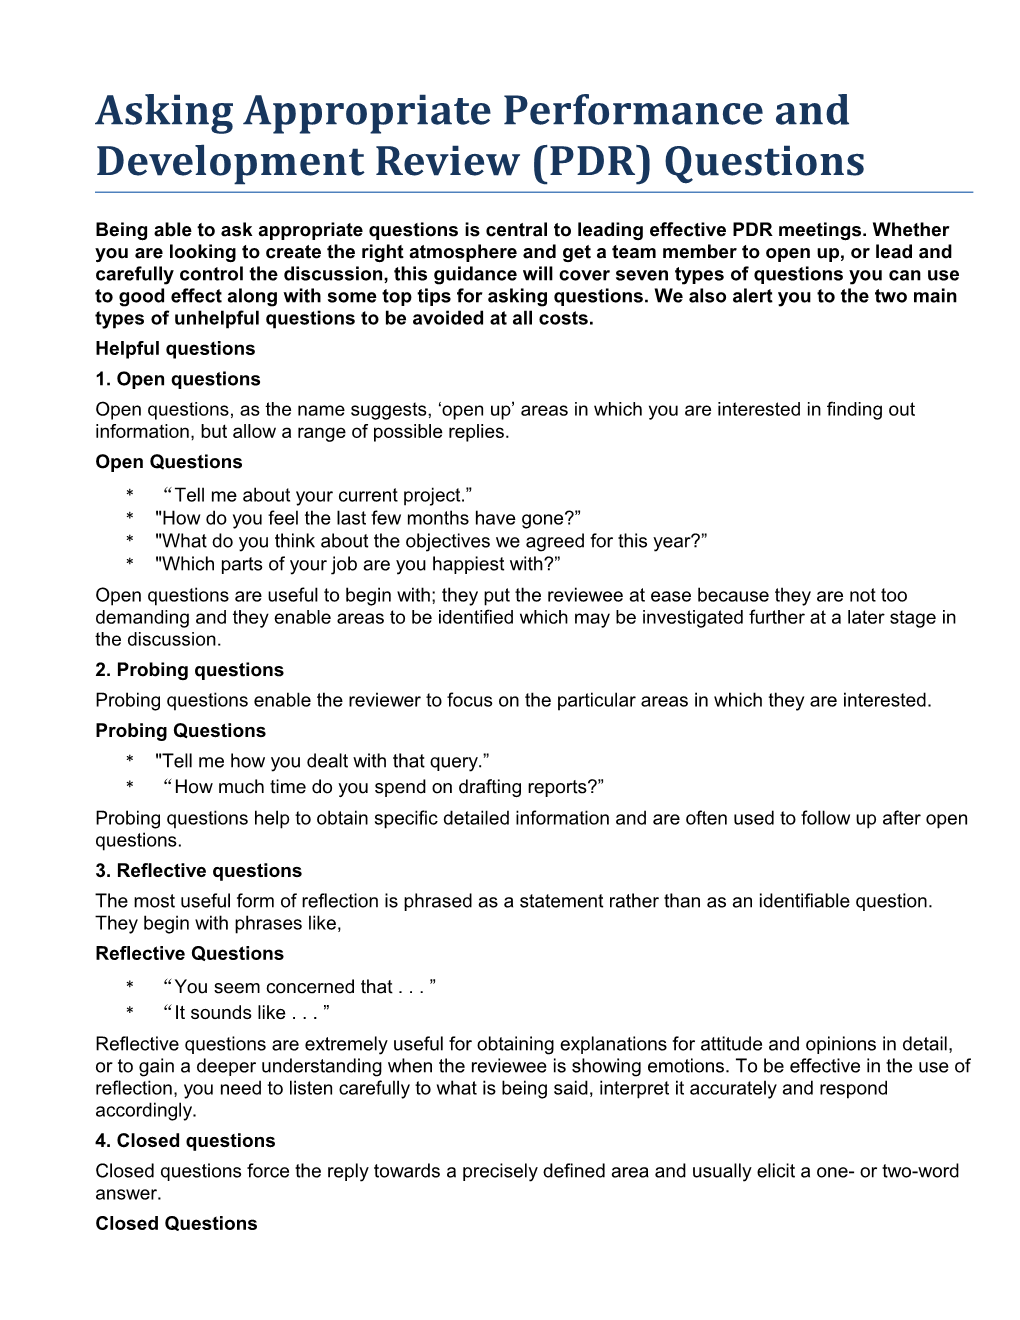 Asking Appropriate Performance and Development Review (PDR) Questions